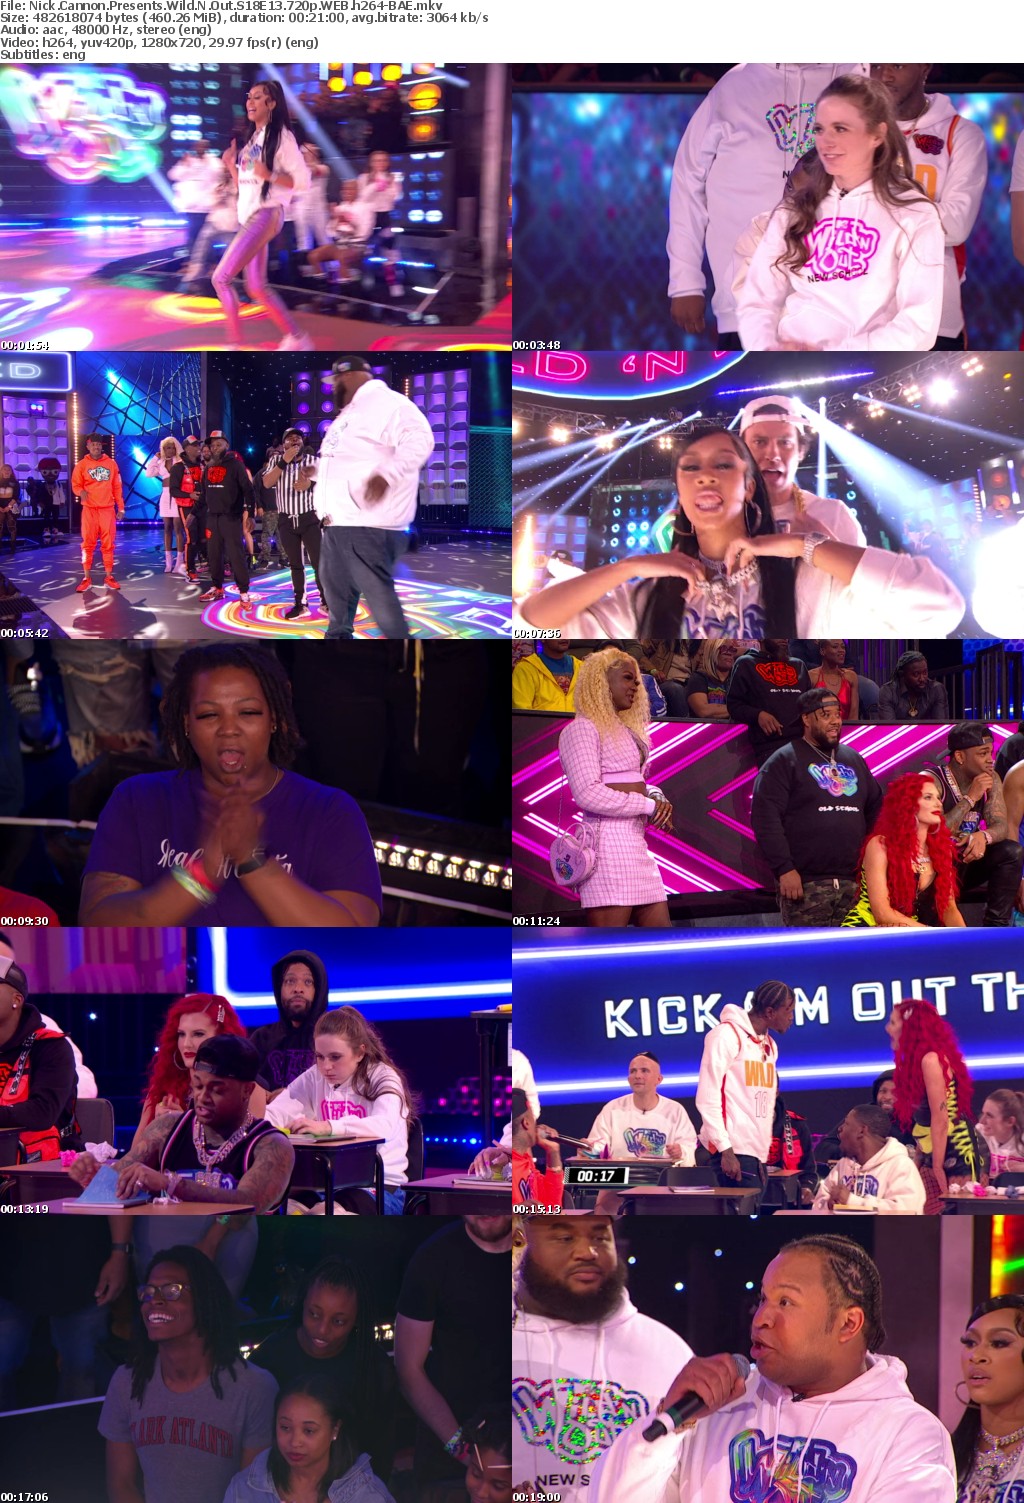 Nick Cannon Presents Wild N Out S18E13 720p WEB h264-BAE